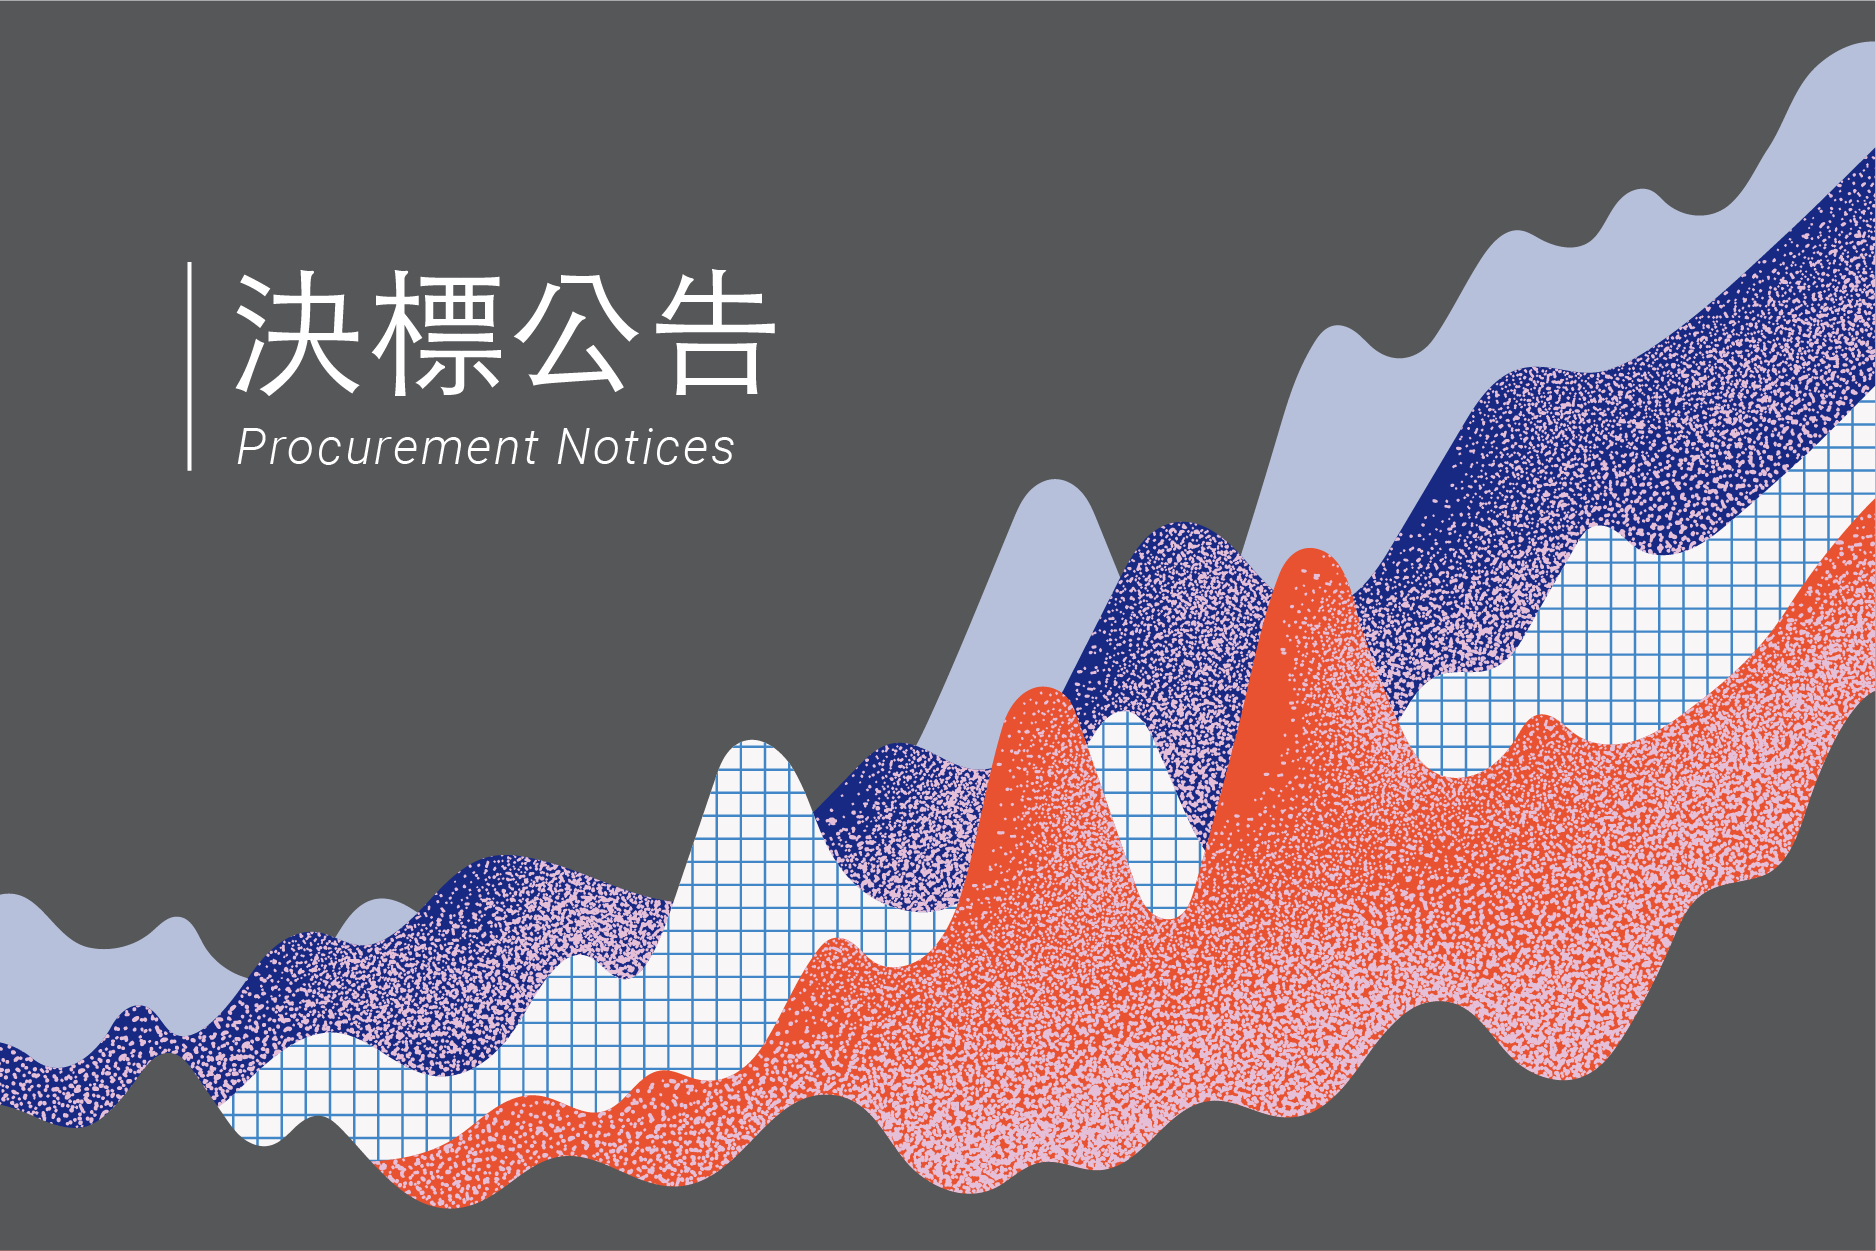 YouTube Music Sessions In Partnership With TAICCA Q1’2022投放工作勞務採購案(決標公告)